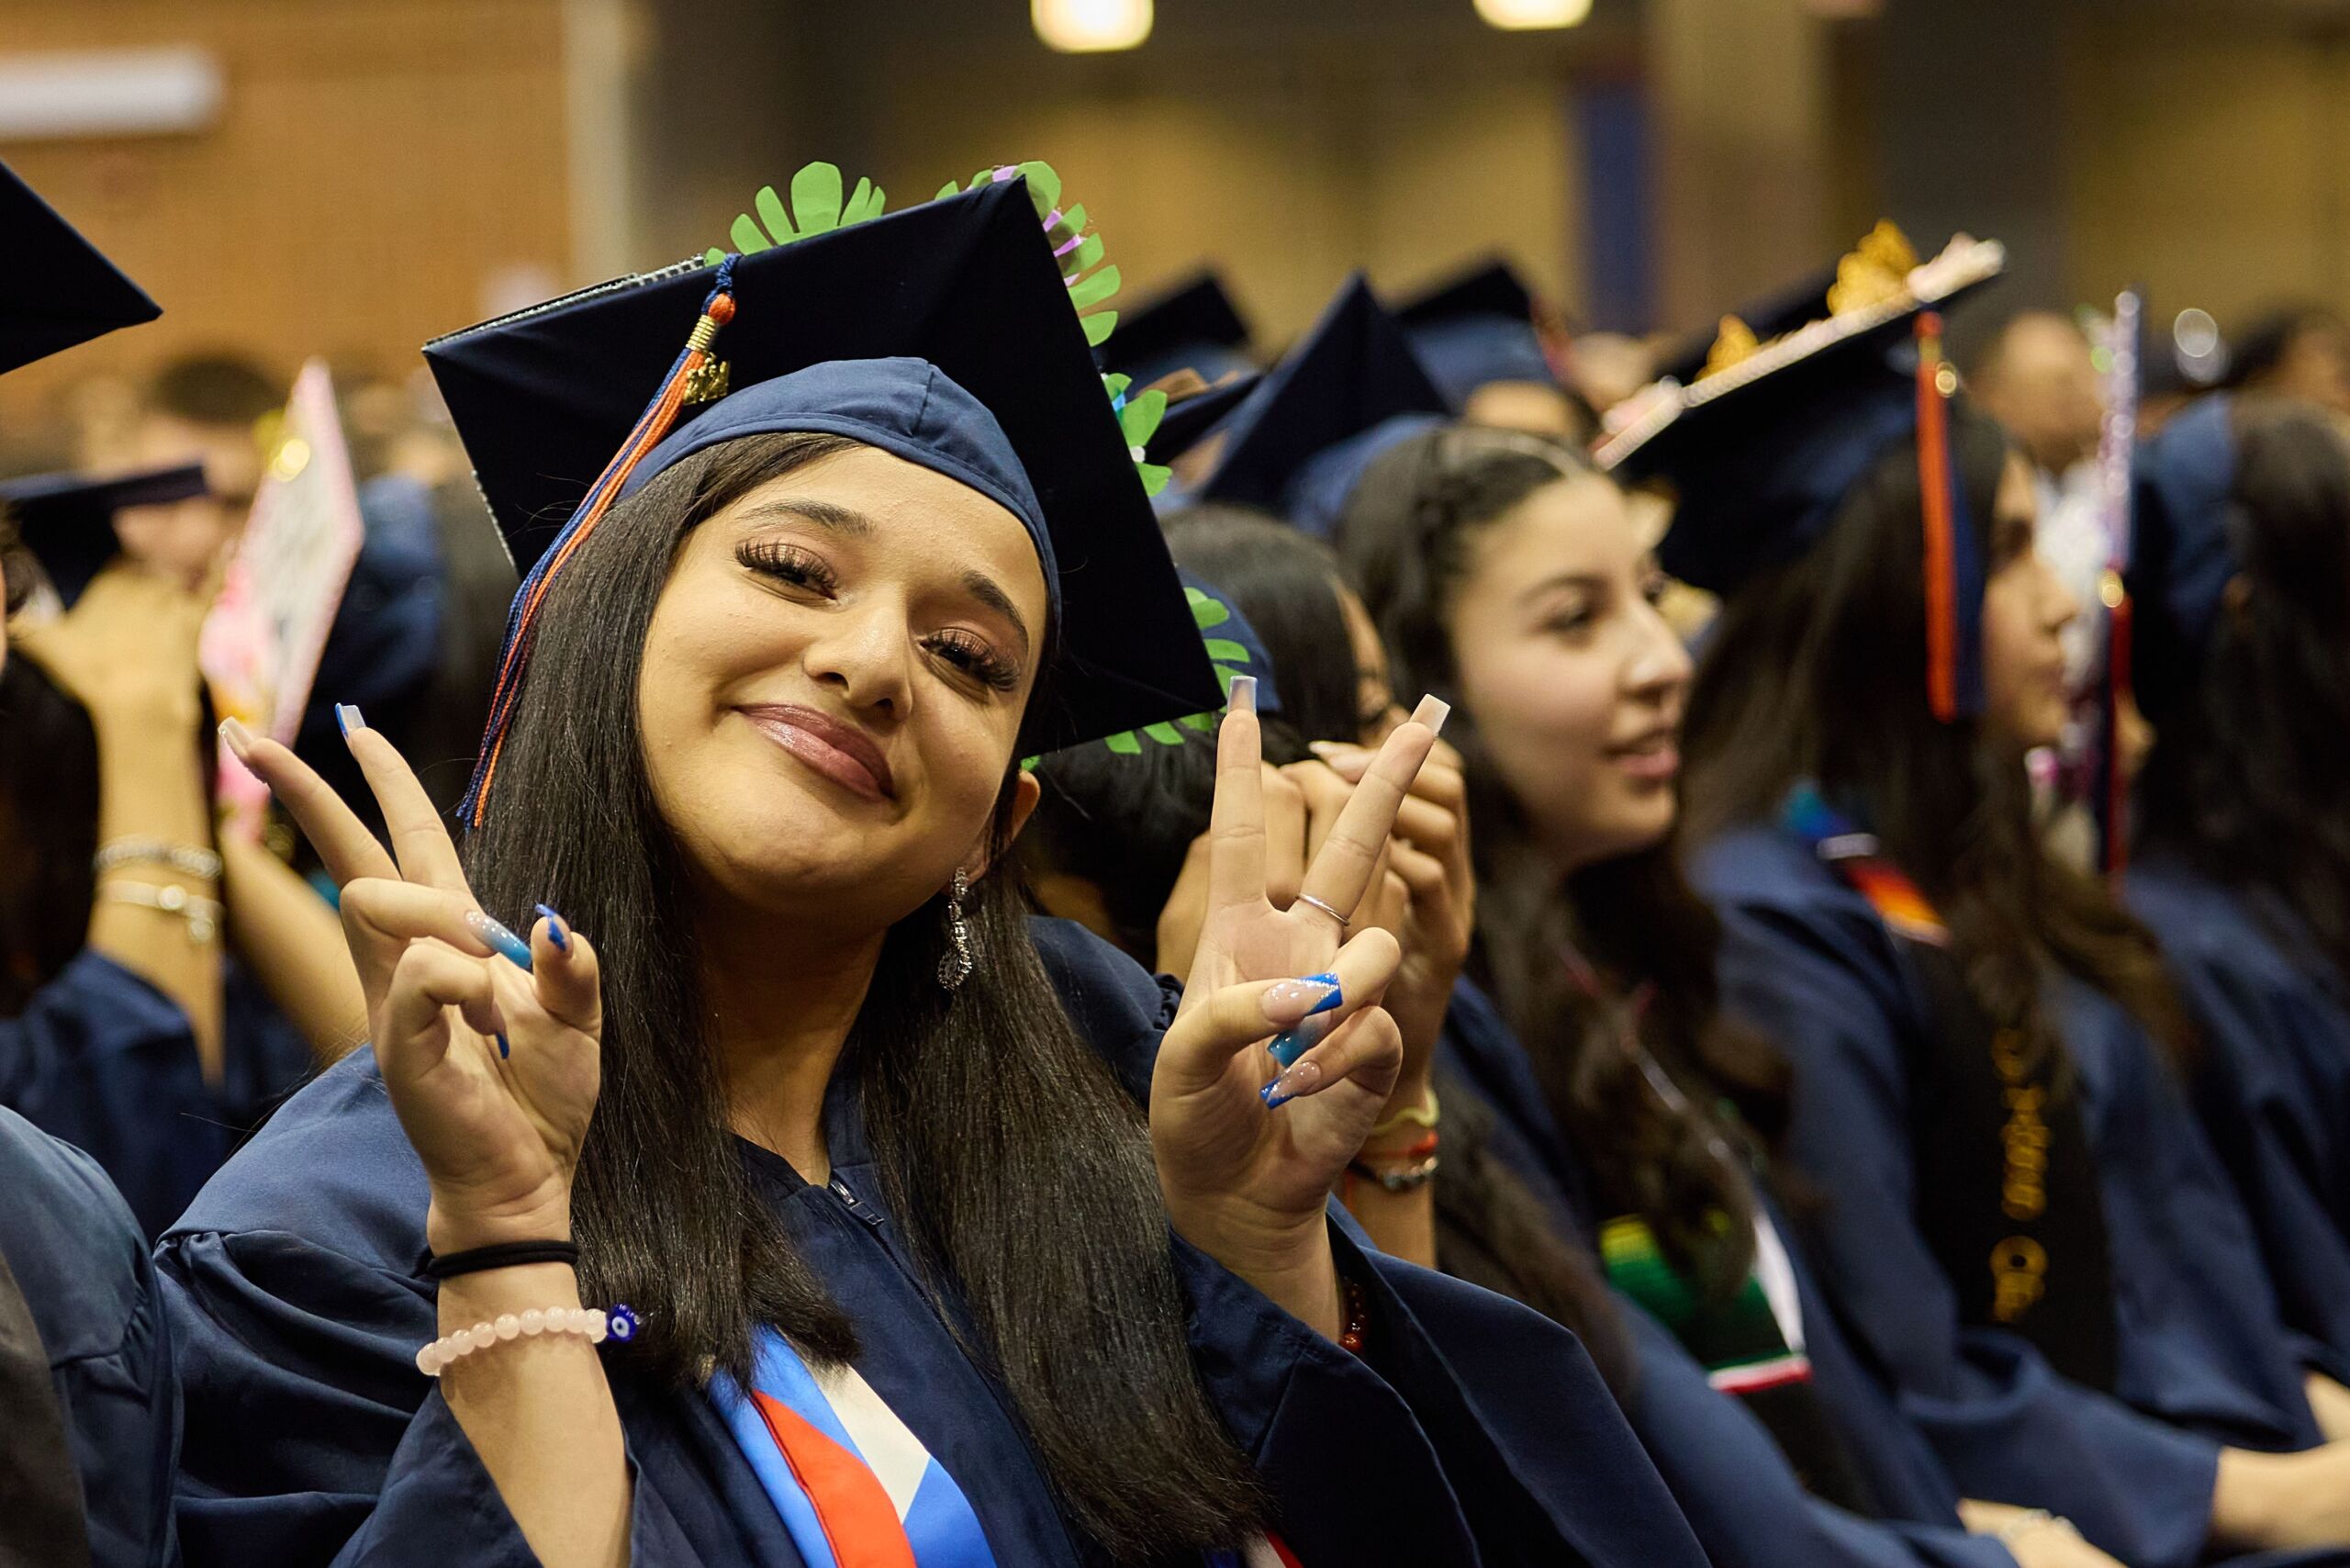 A young Latinx student in a cap and gown smiles and puts up two peace signs at their graduation.